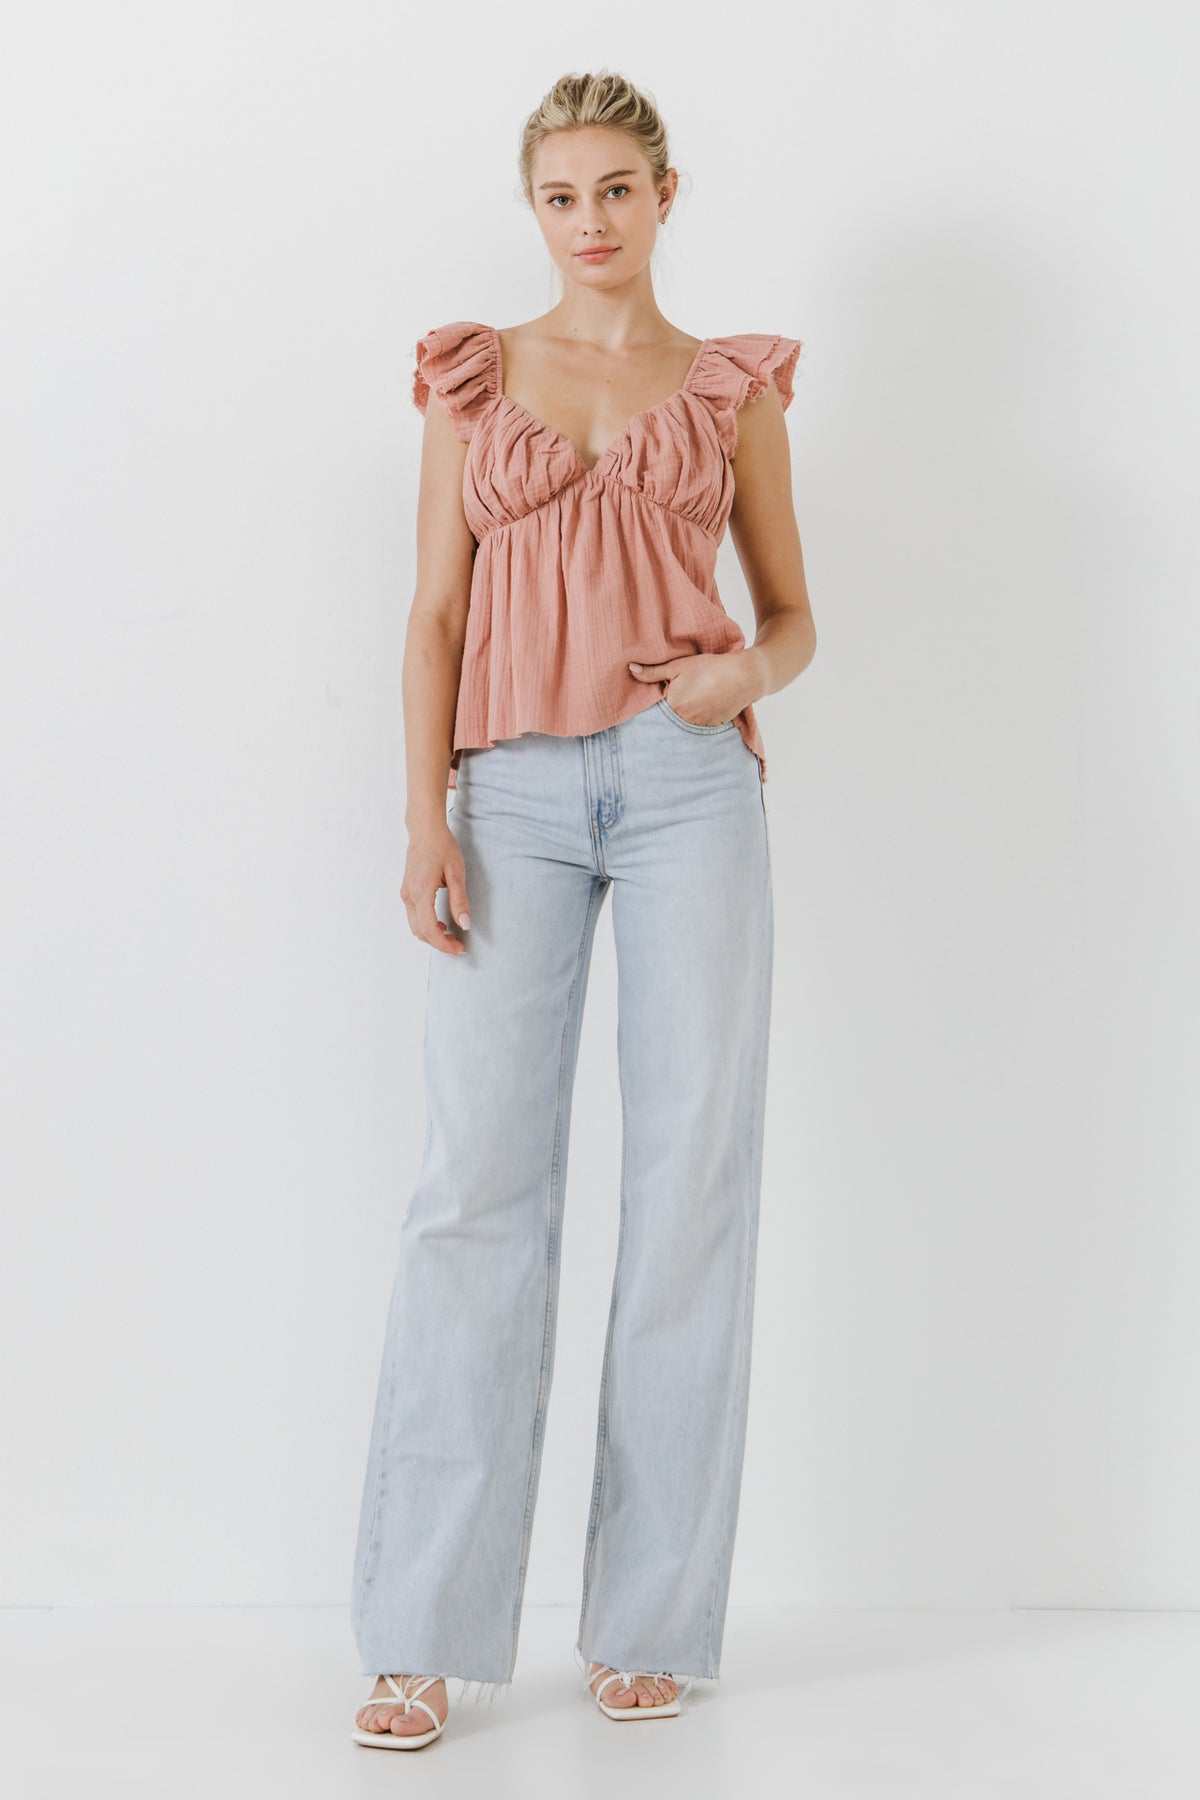 FREE THE ROSES - Sweet Heart Neck Raw Edge Top - TOPS available at Objectrare